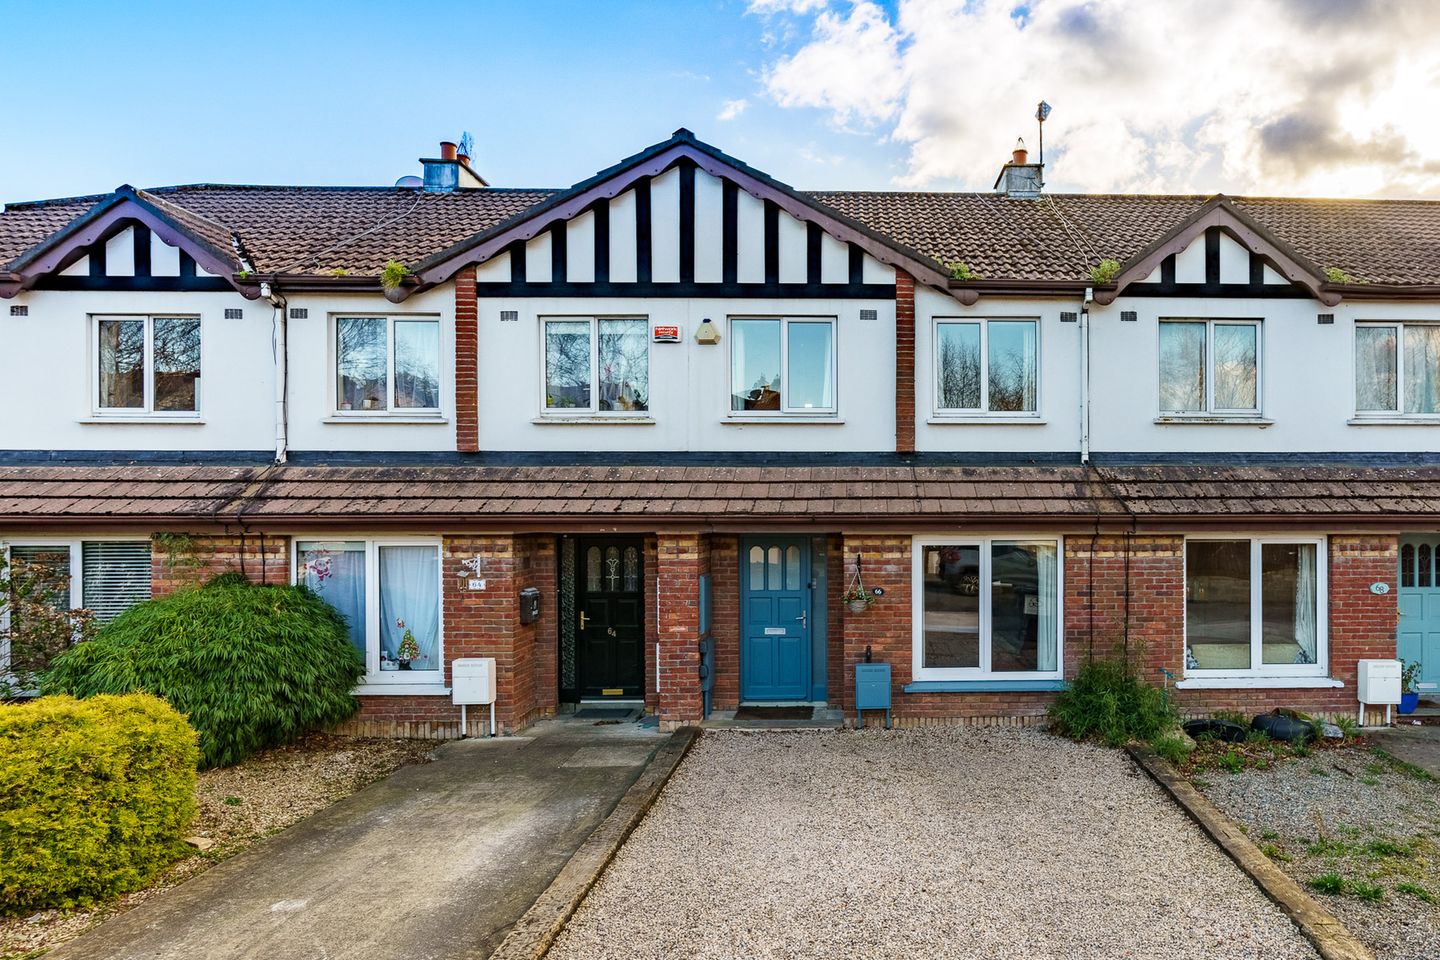 66 Connawood Lawn, Old Connaught Avenue, Bray, A98YH94